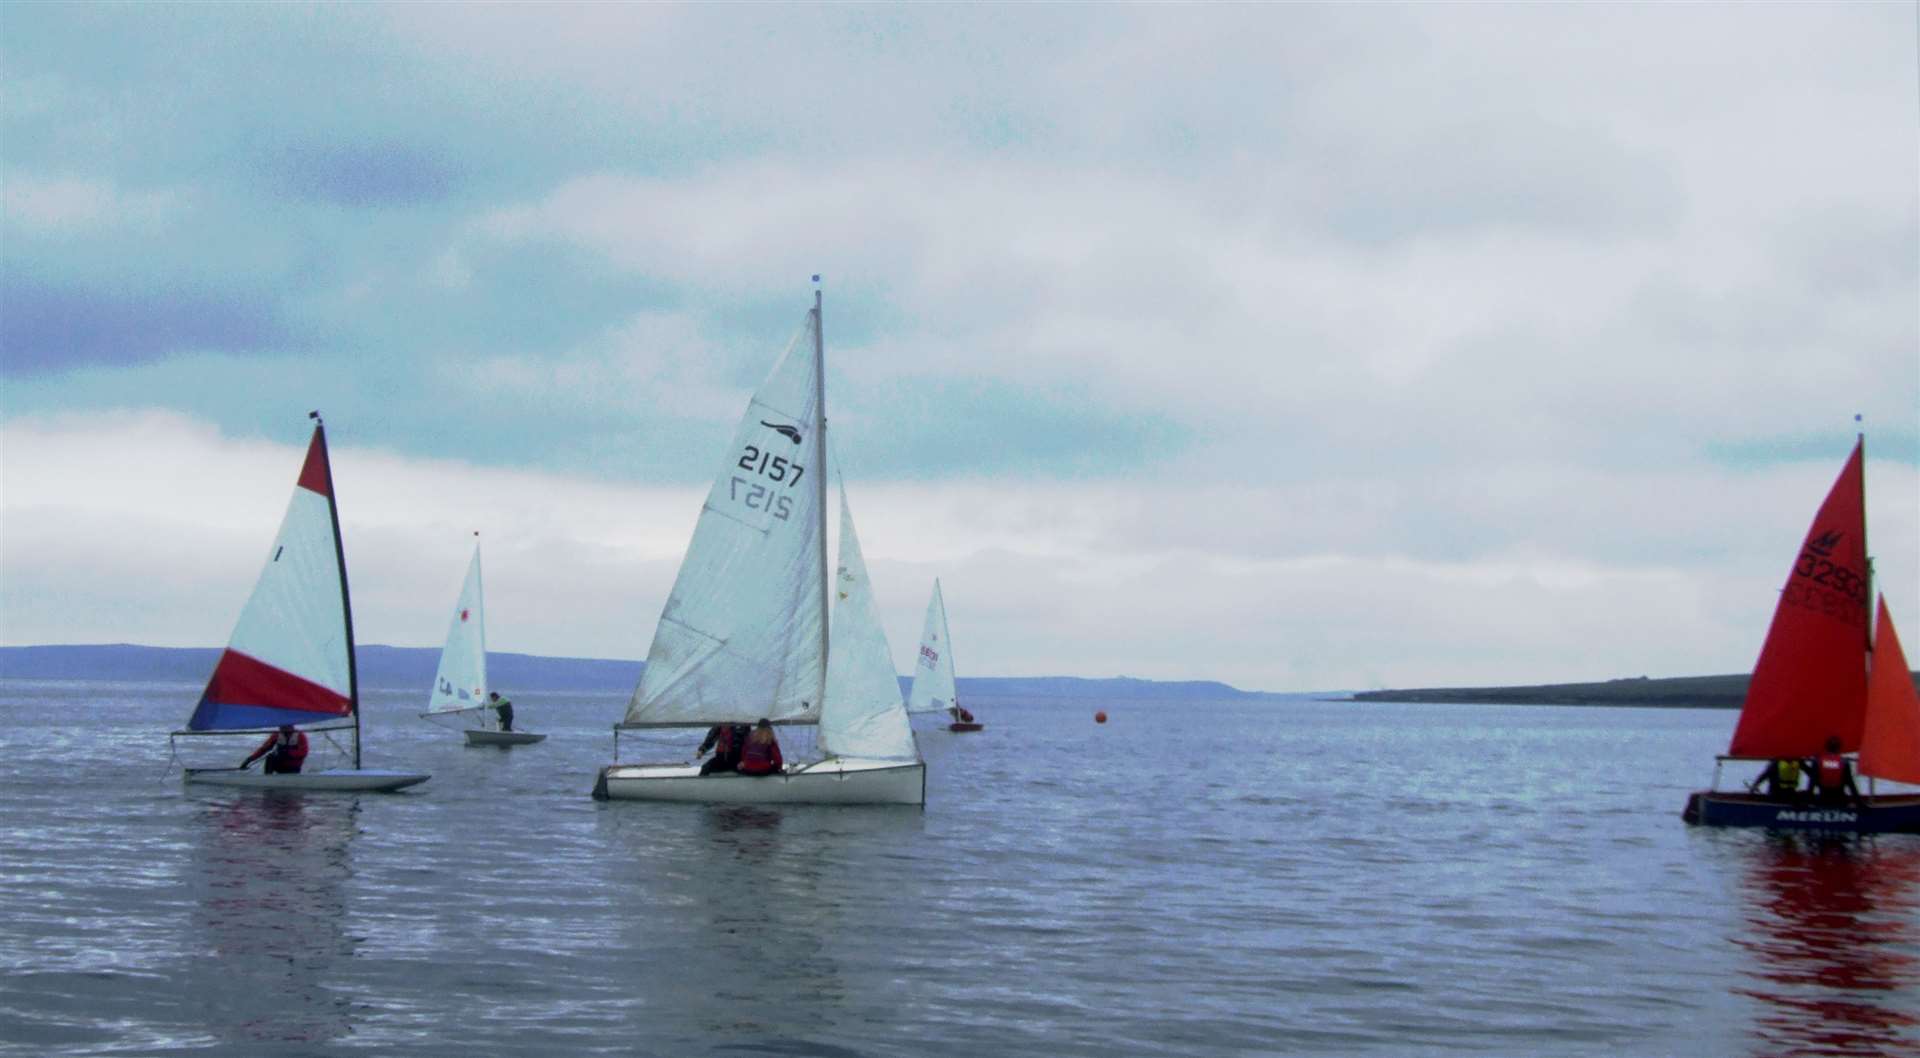 All the boats in the pursuit race held on Sunday by Pentland Firth Yacht Club.